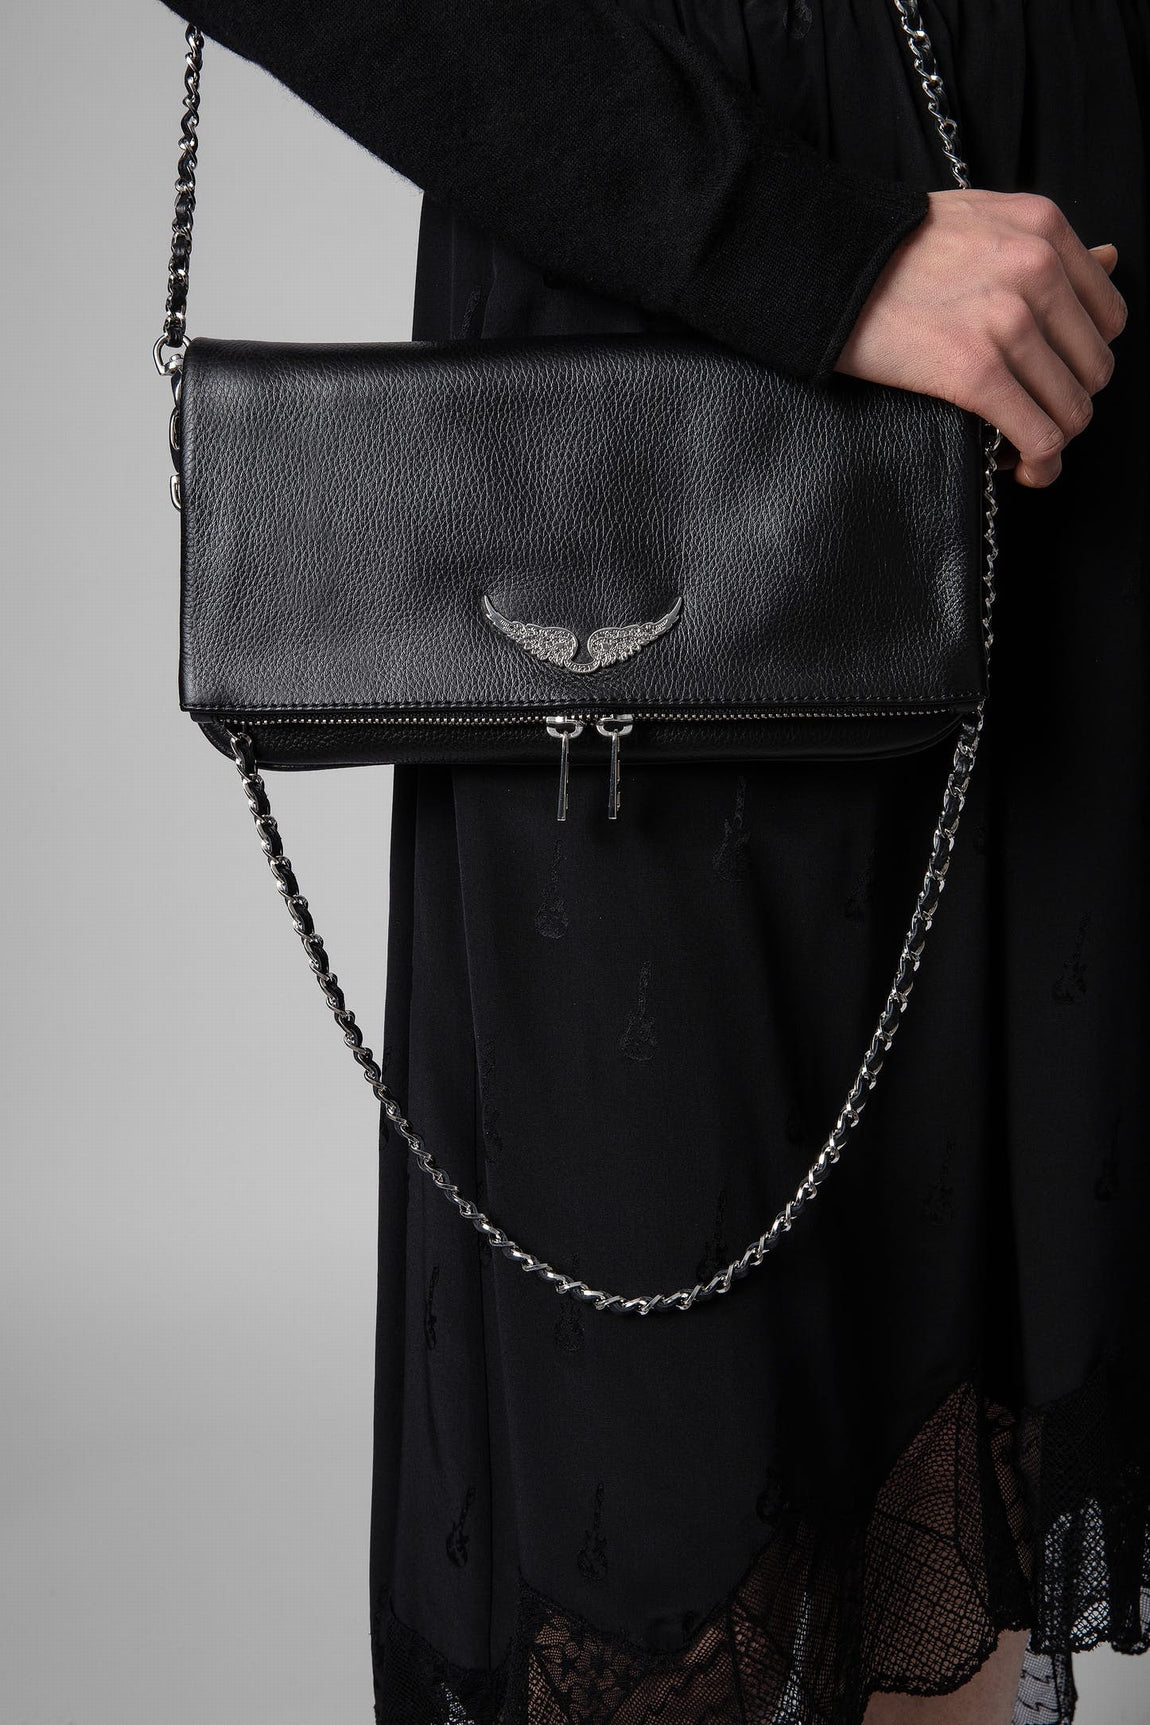 Rock grained leather bag, black-silver